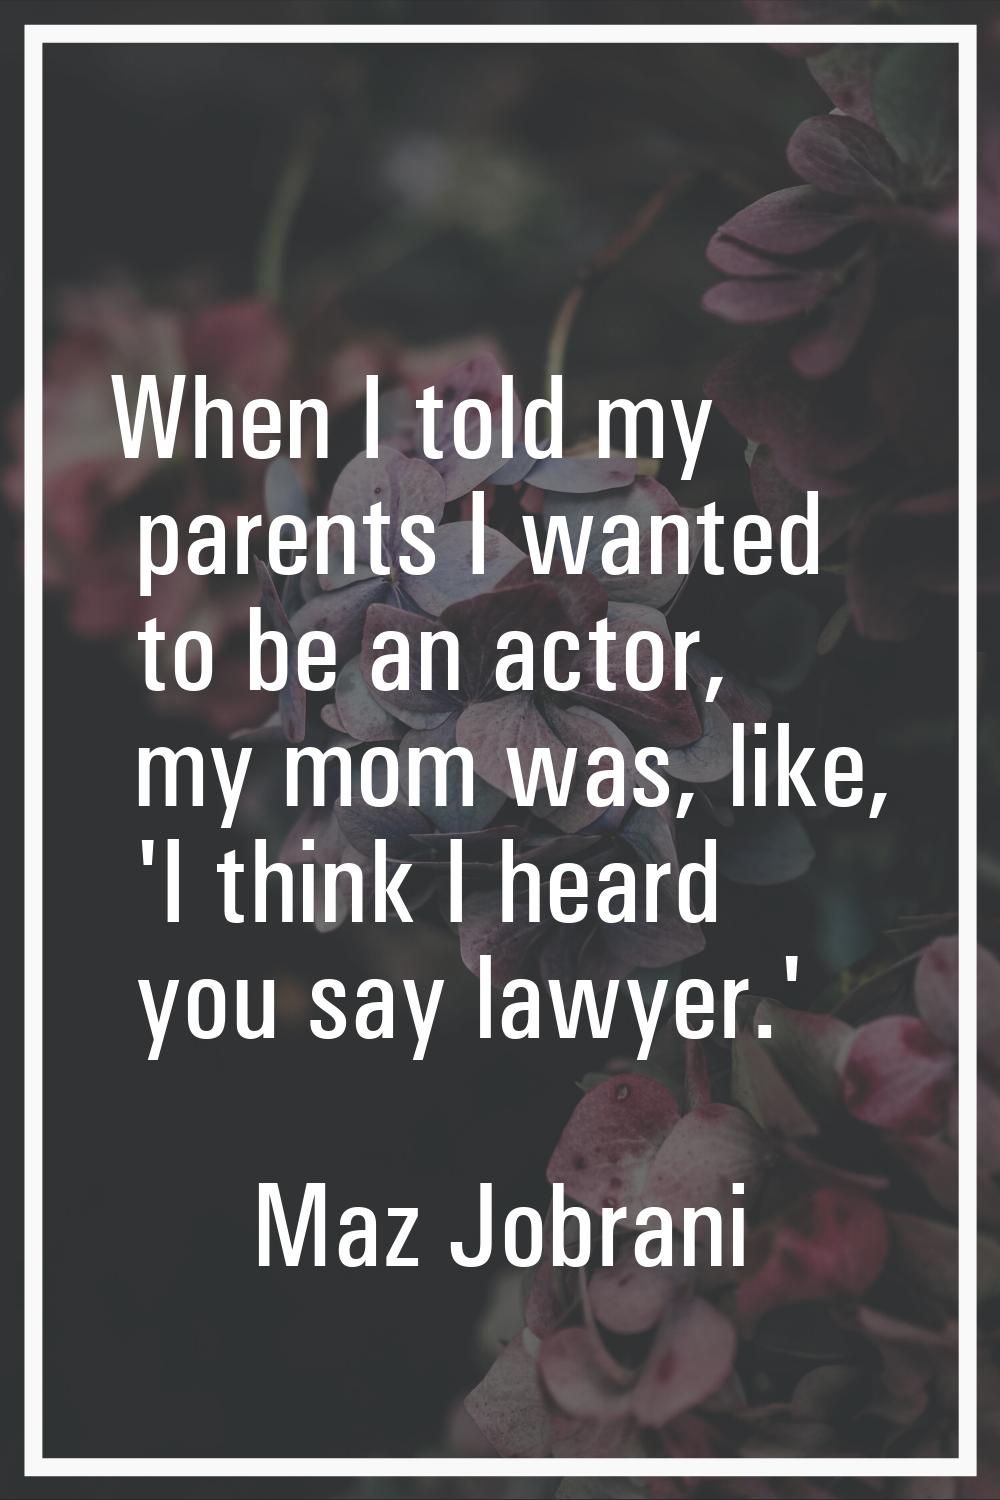 When I told my parents I wanted to be an actor, my mom was, like, 'I think I heard you say lawyer.'